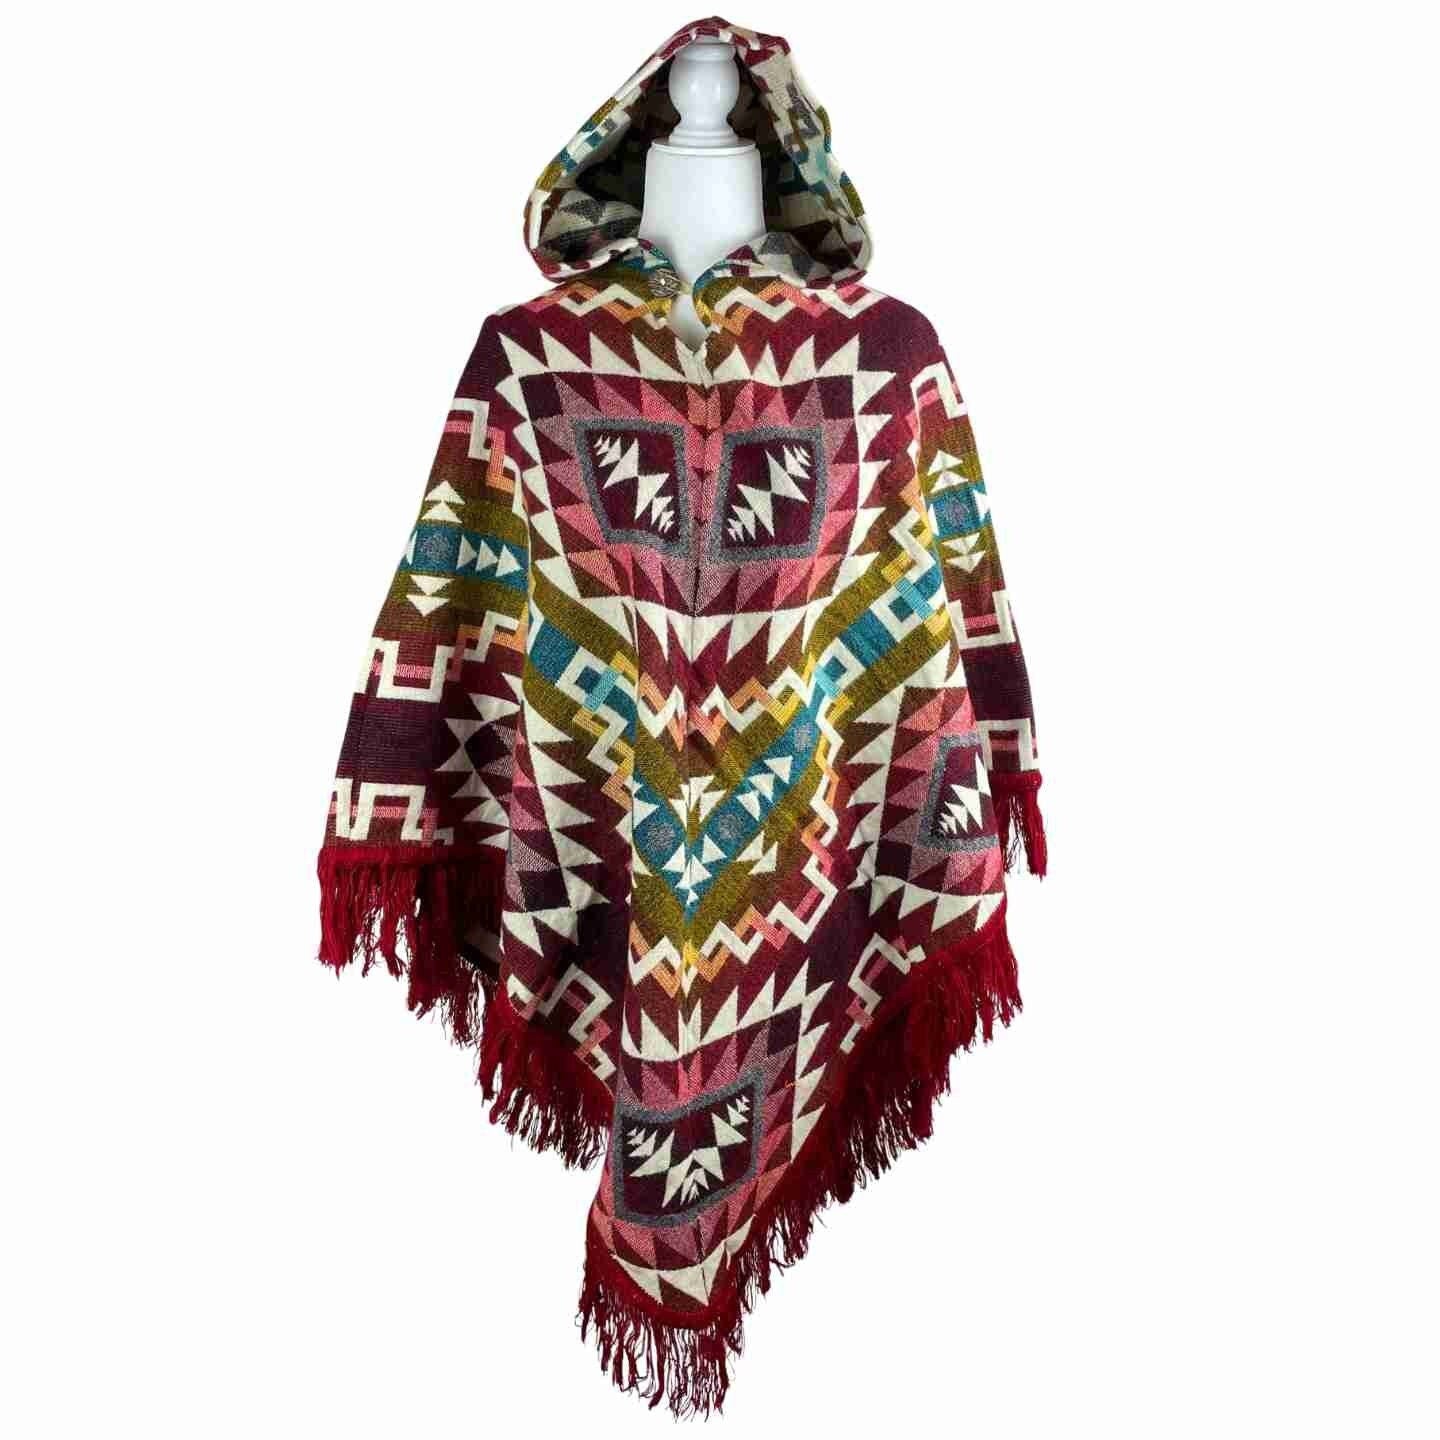 Warm Cozy Boho Alpaca Wool Hooded Poncho - Winter Soft Outerwear for Women, Wine Colorful V Style Cape with Tassels